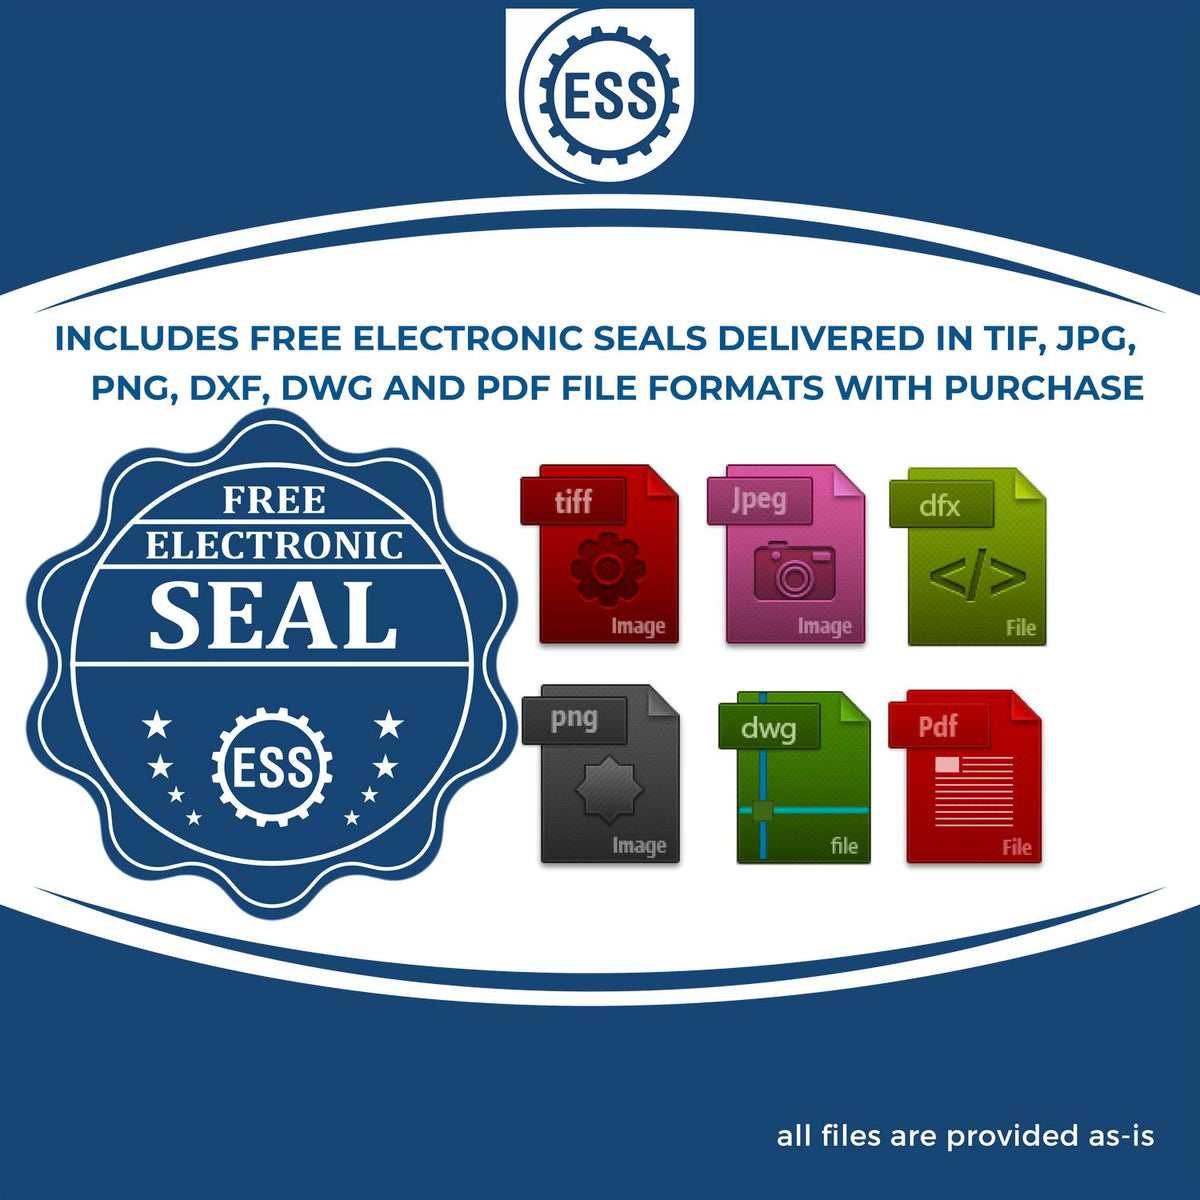 An infographic for the free electronic seal for the State of North Carolina Extended Long Reach Geologist Seal illustrating the different file type icons such as DXF, DWG, TIF, JPG and PNG.